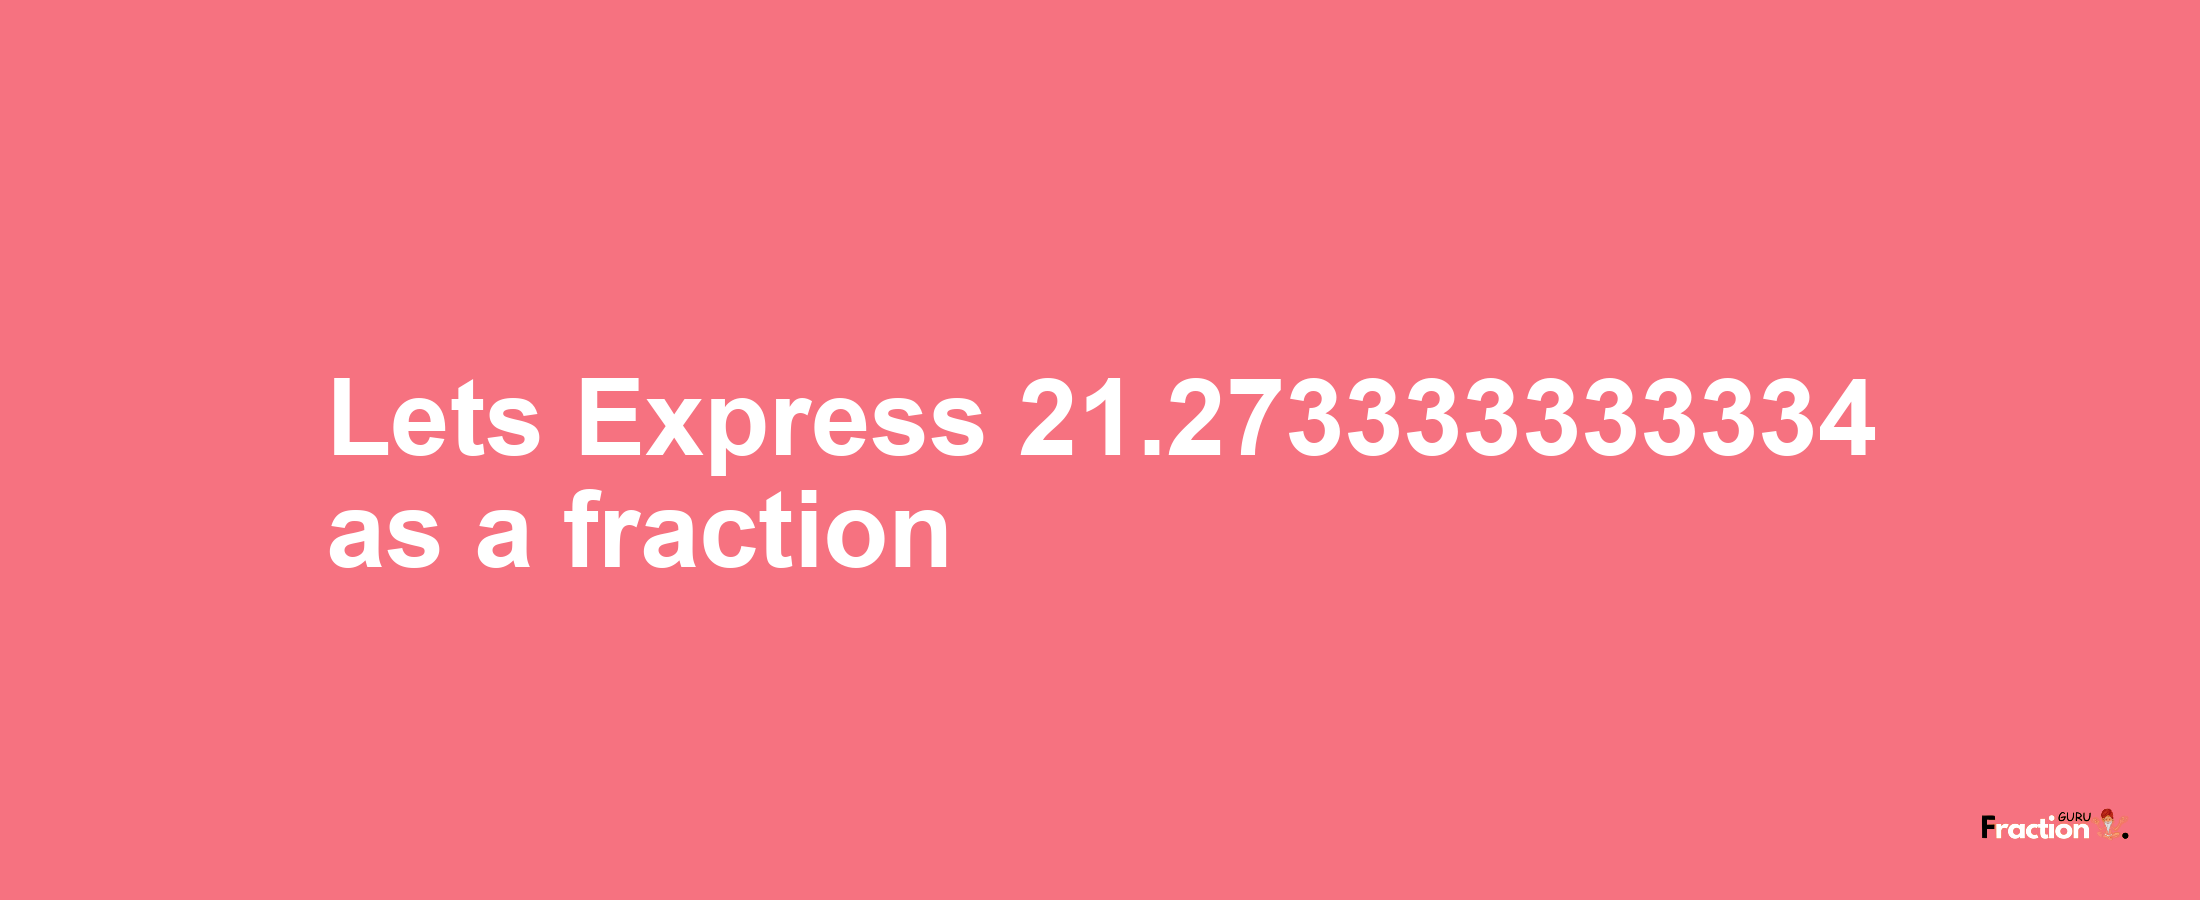 Lets Express 21.273333333334 as afraction